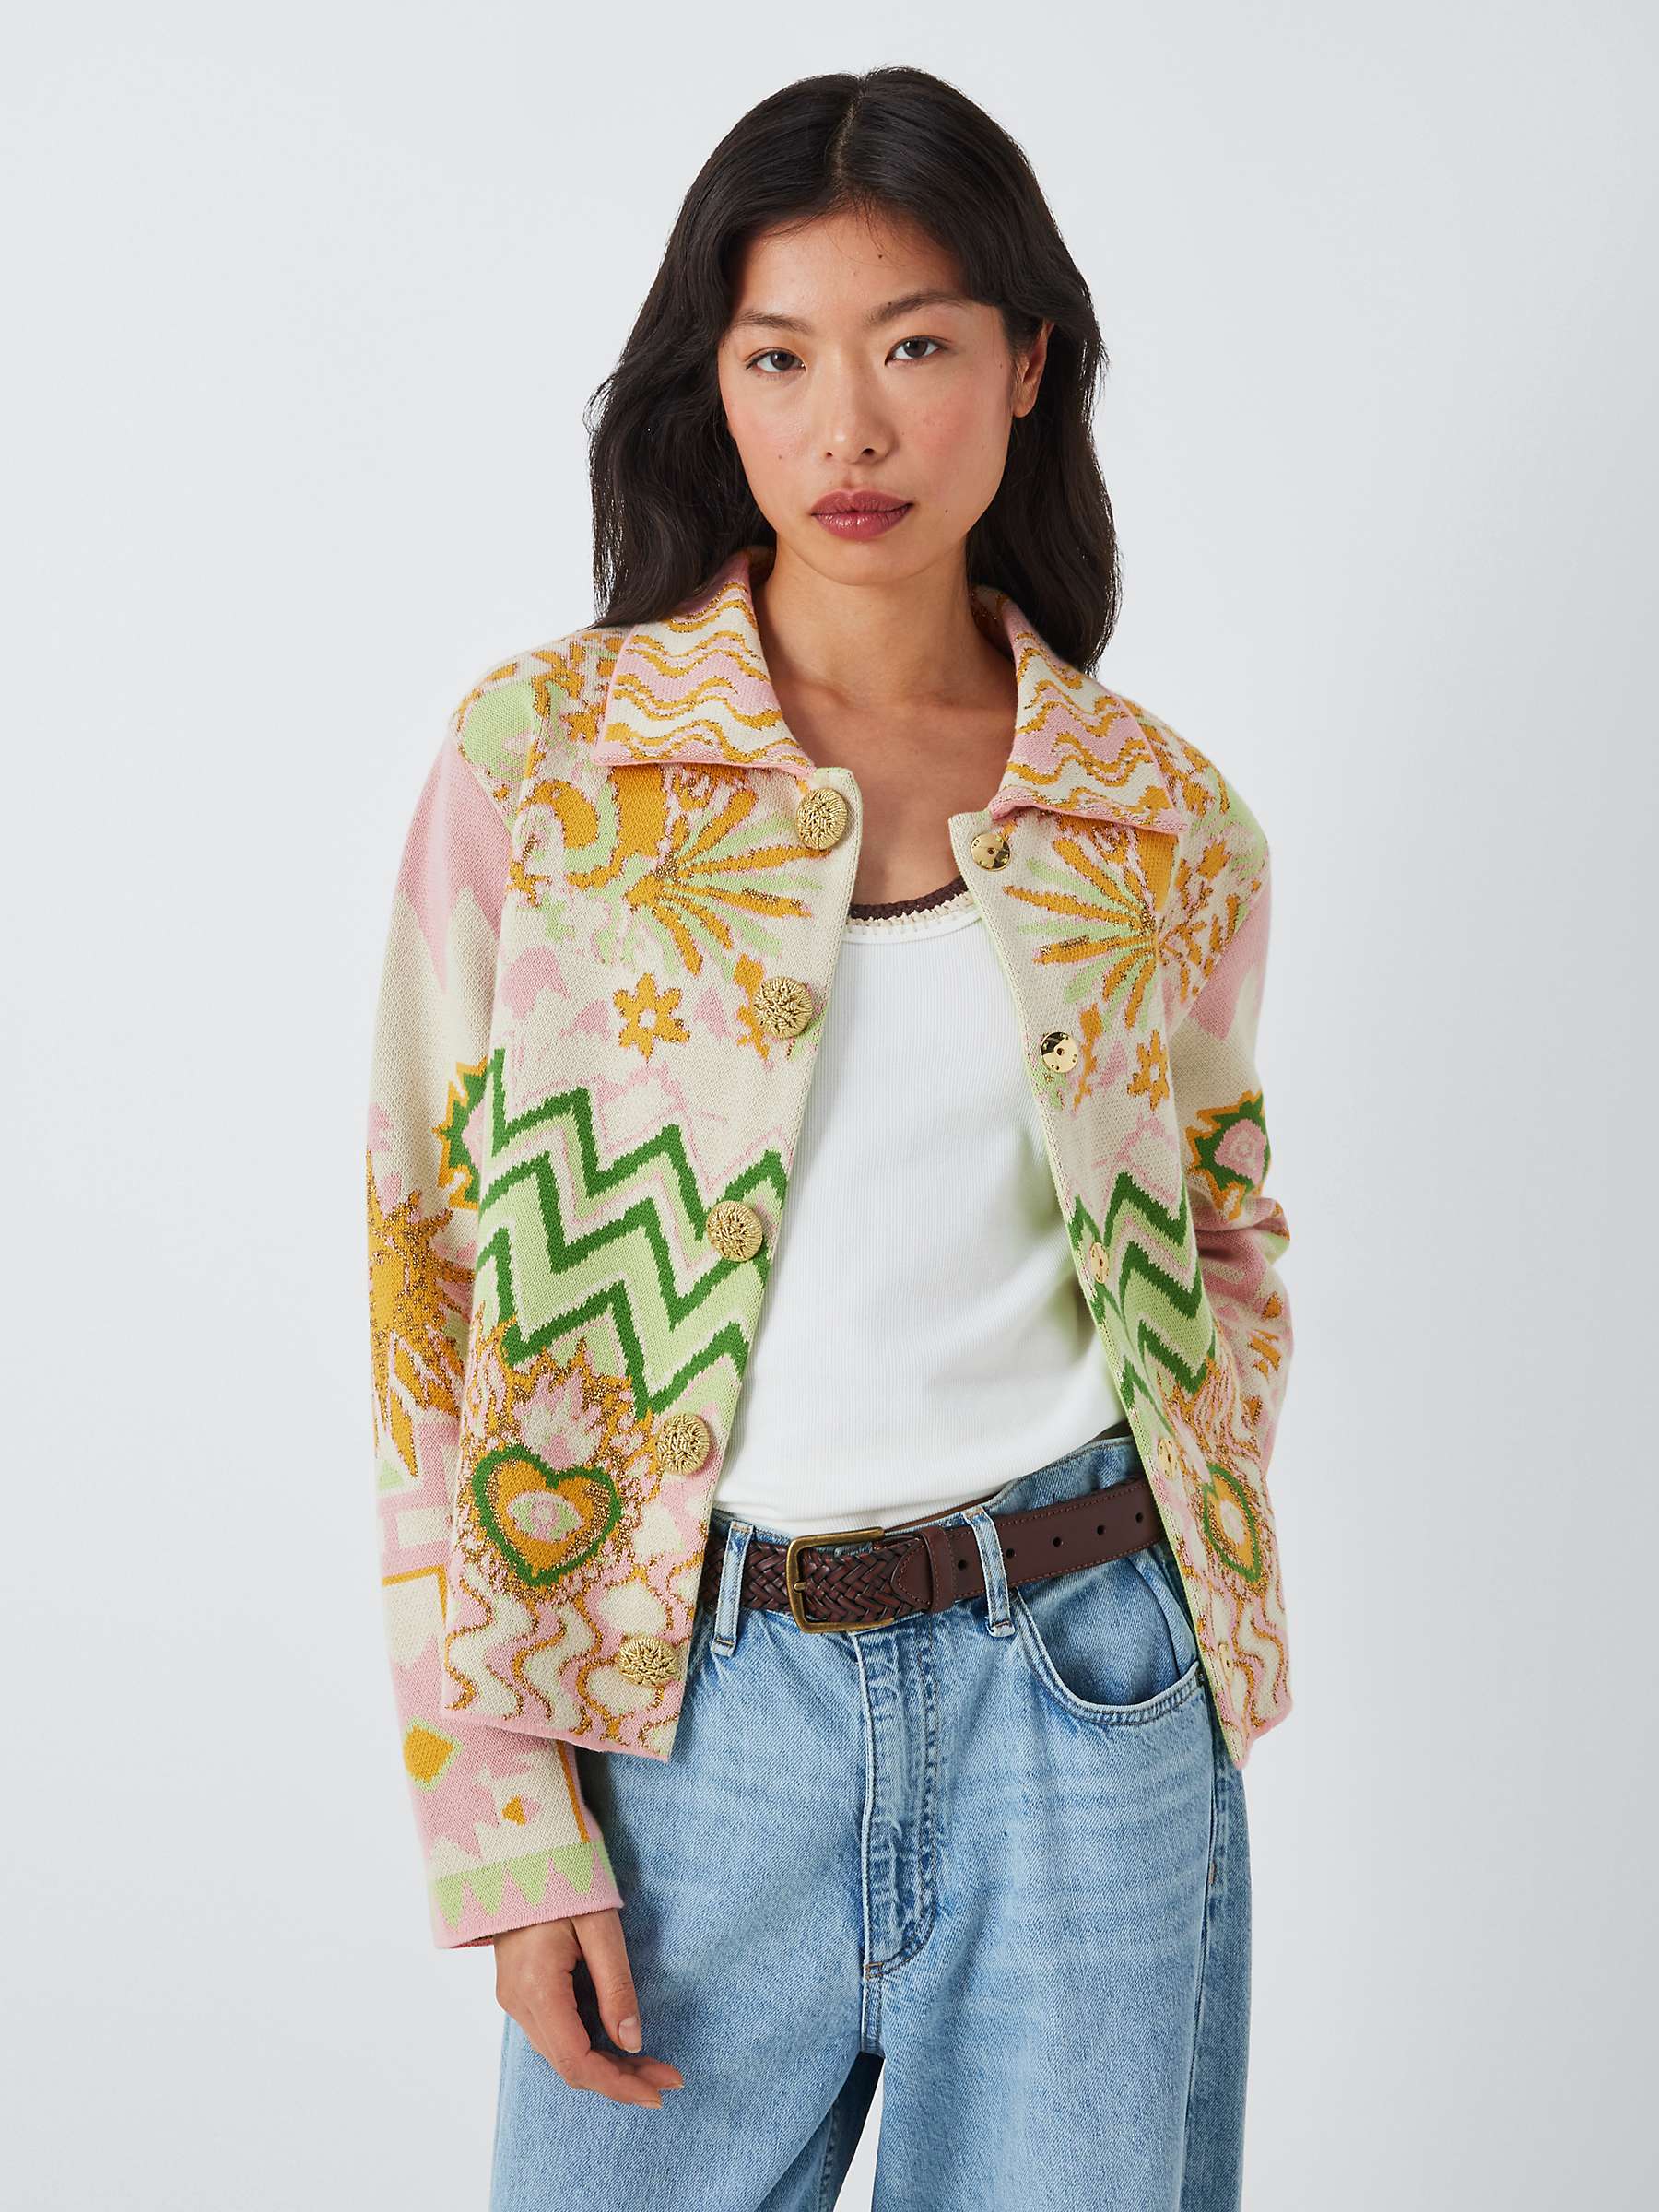 Buy Hayley Menzies Under The Sun Jacquard Jacket, Pink/Green Online at johnlewis.com